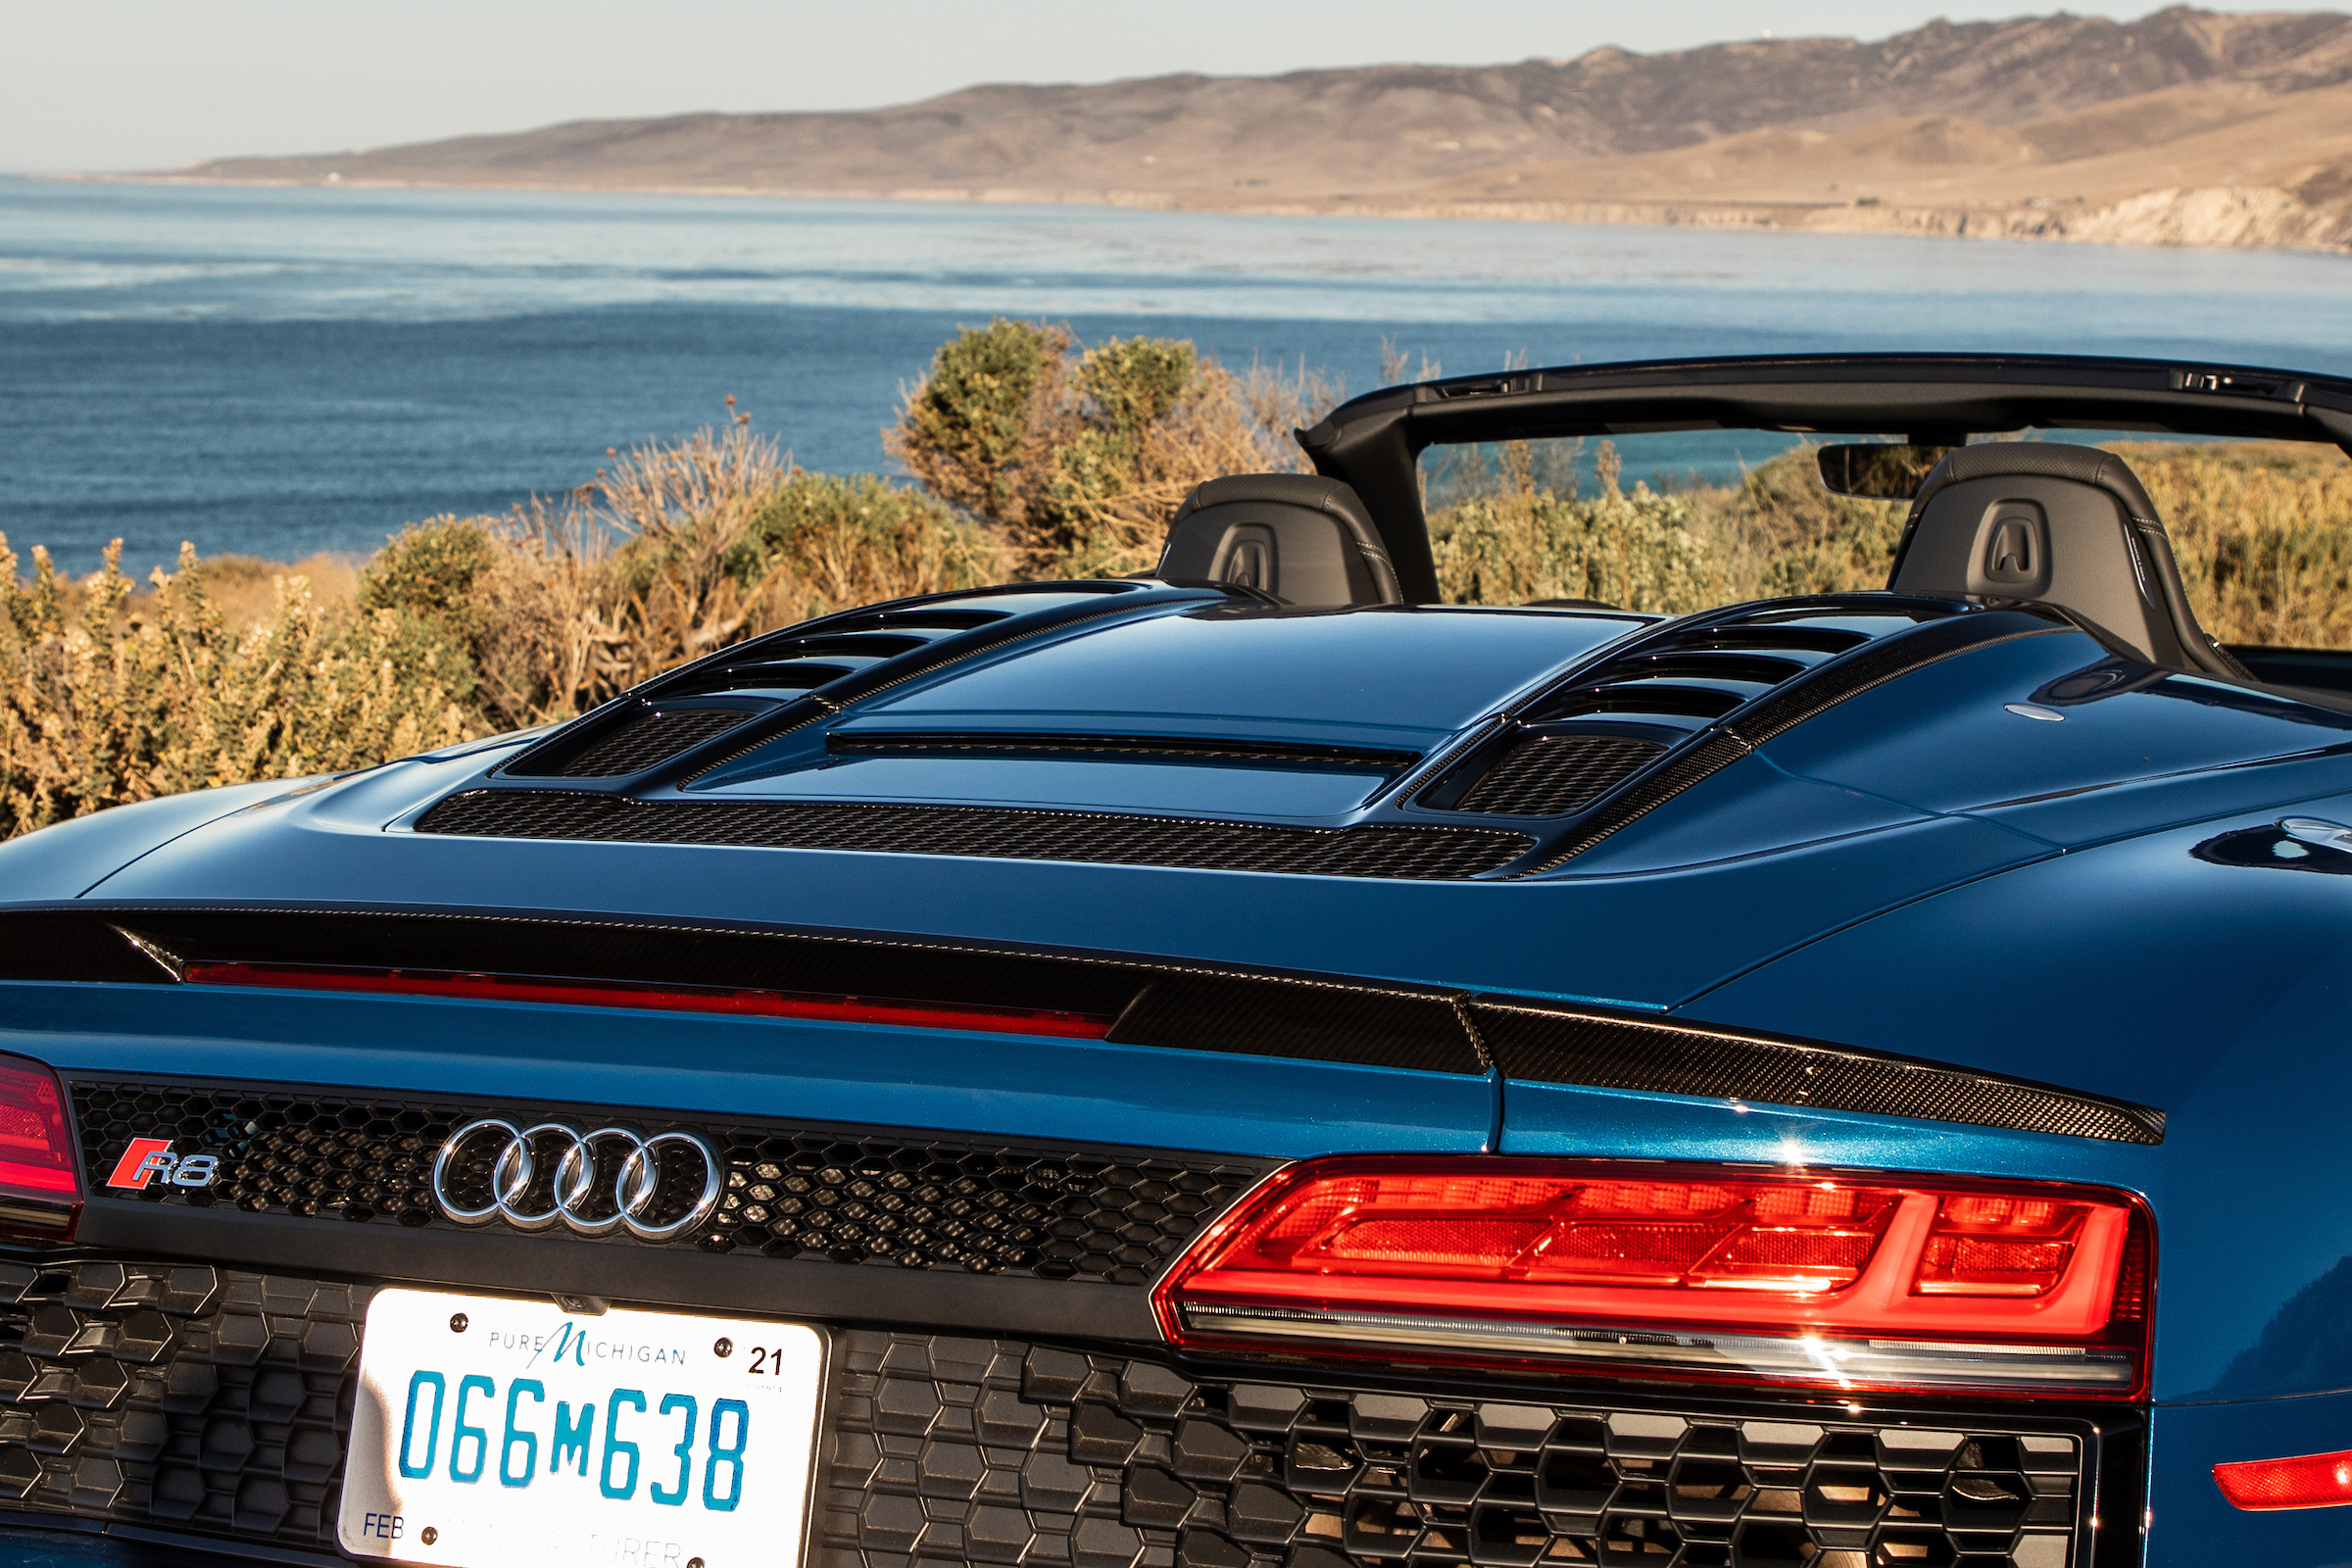 2020 Audi R8 Performance Review: What Makes This Supercar the Best It's  Ever Been